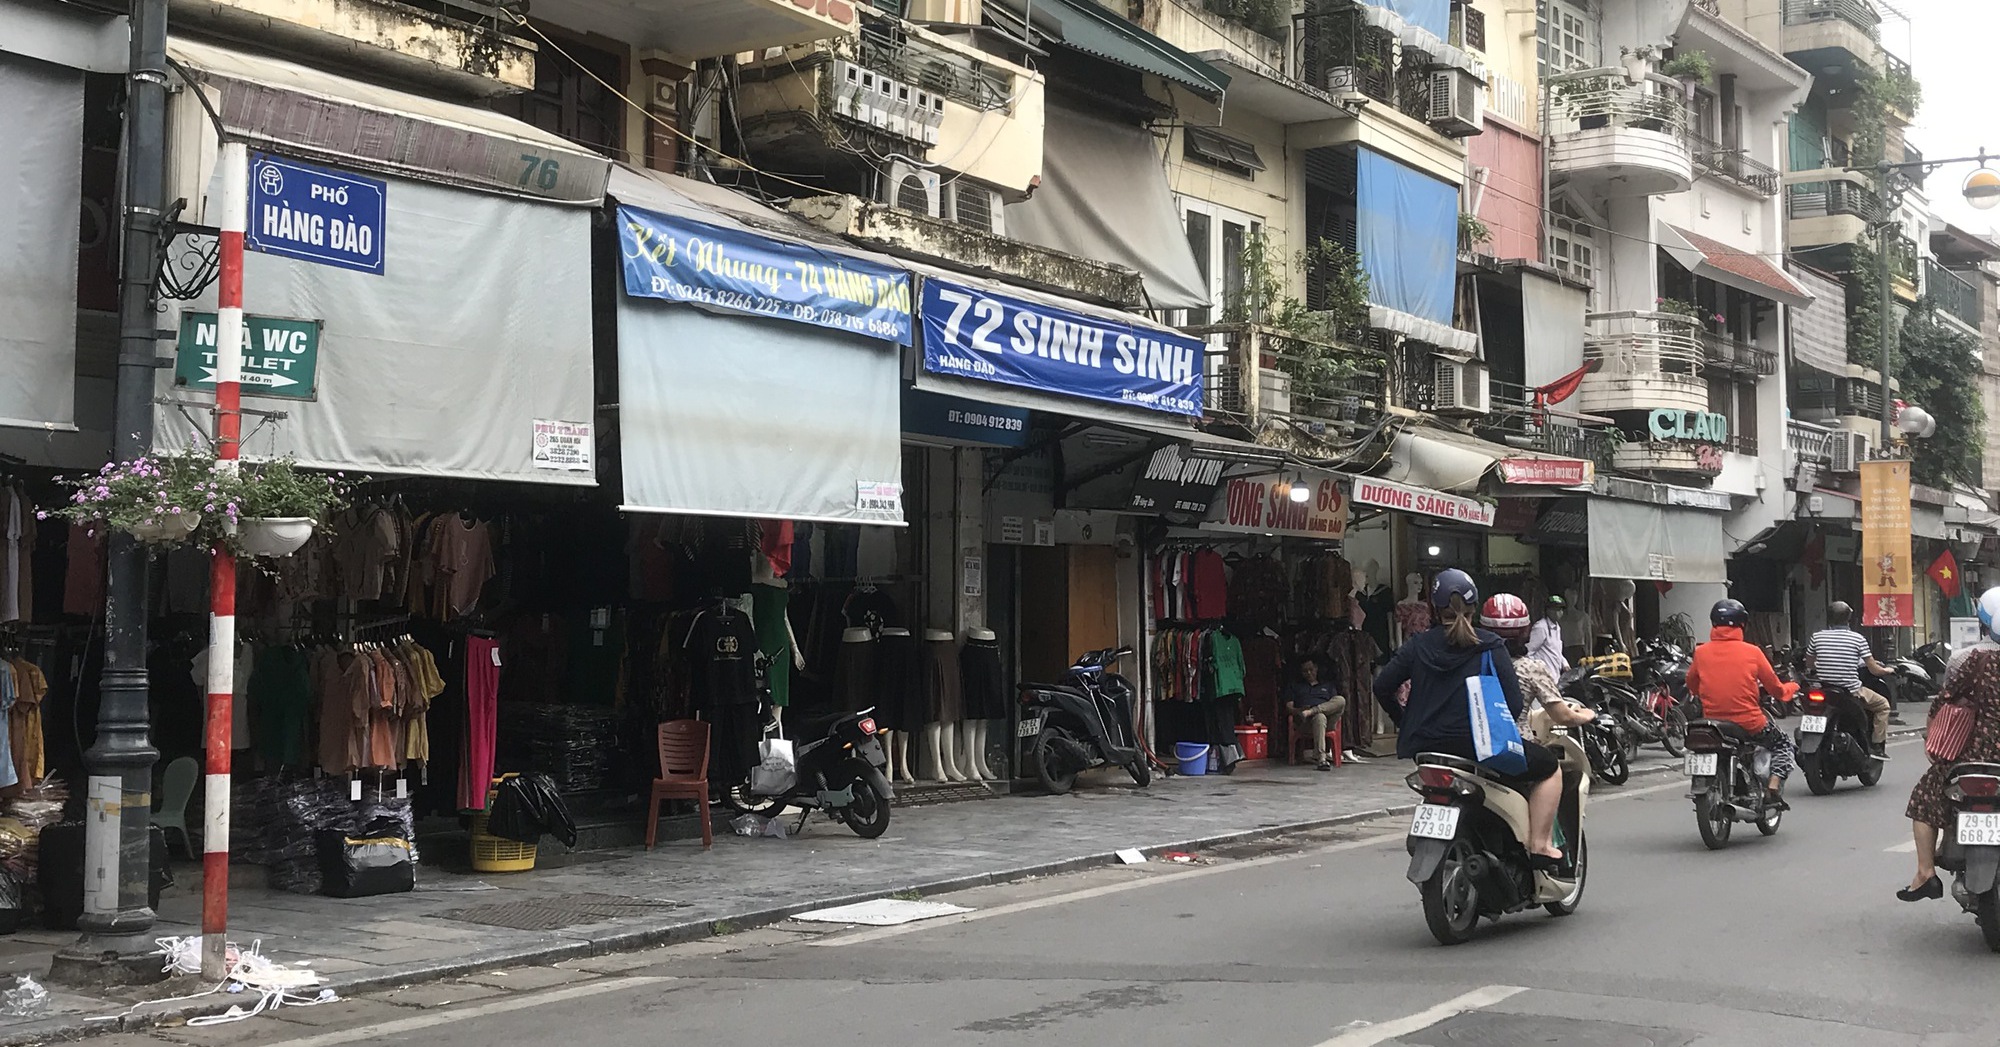 Demand for rental houses in Hanoi’s Old Quarter has increased again